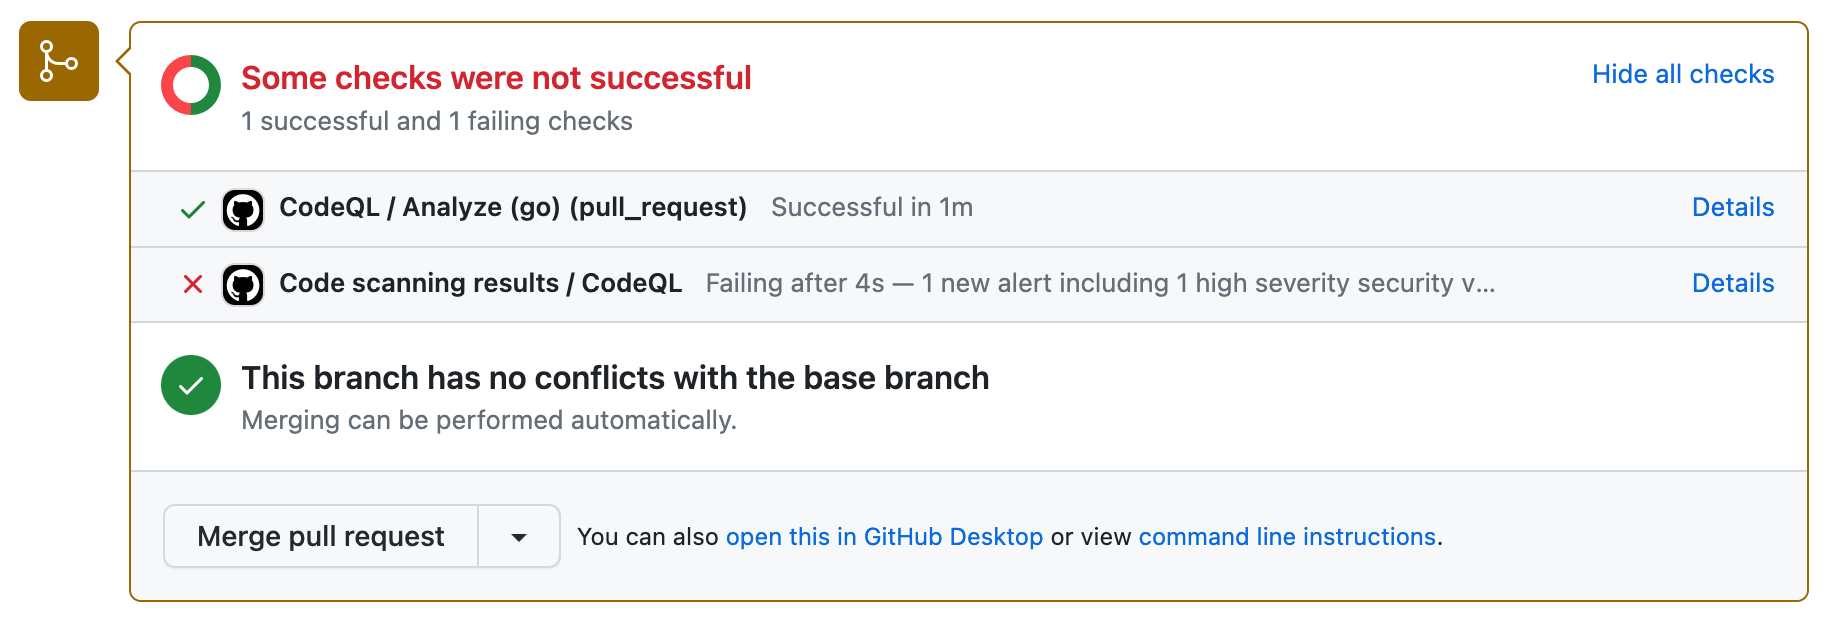 Screenshot of the merge box for a pull request. Next to the "Code scanning results / CodeQL" check is "1 new alert including 1 high severity security v..."